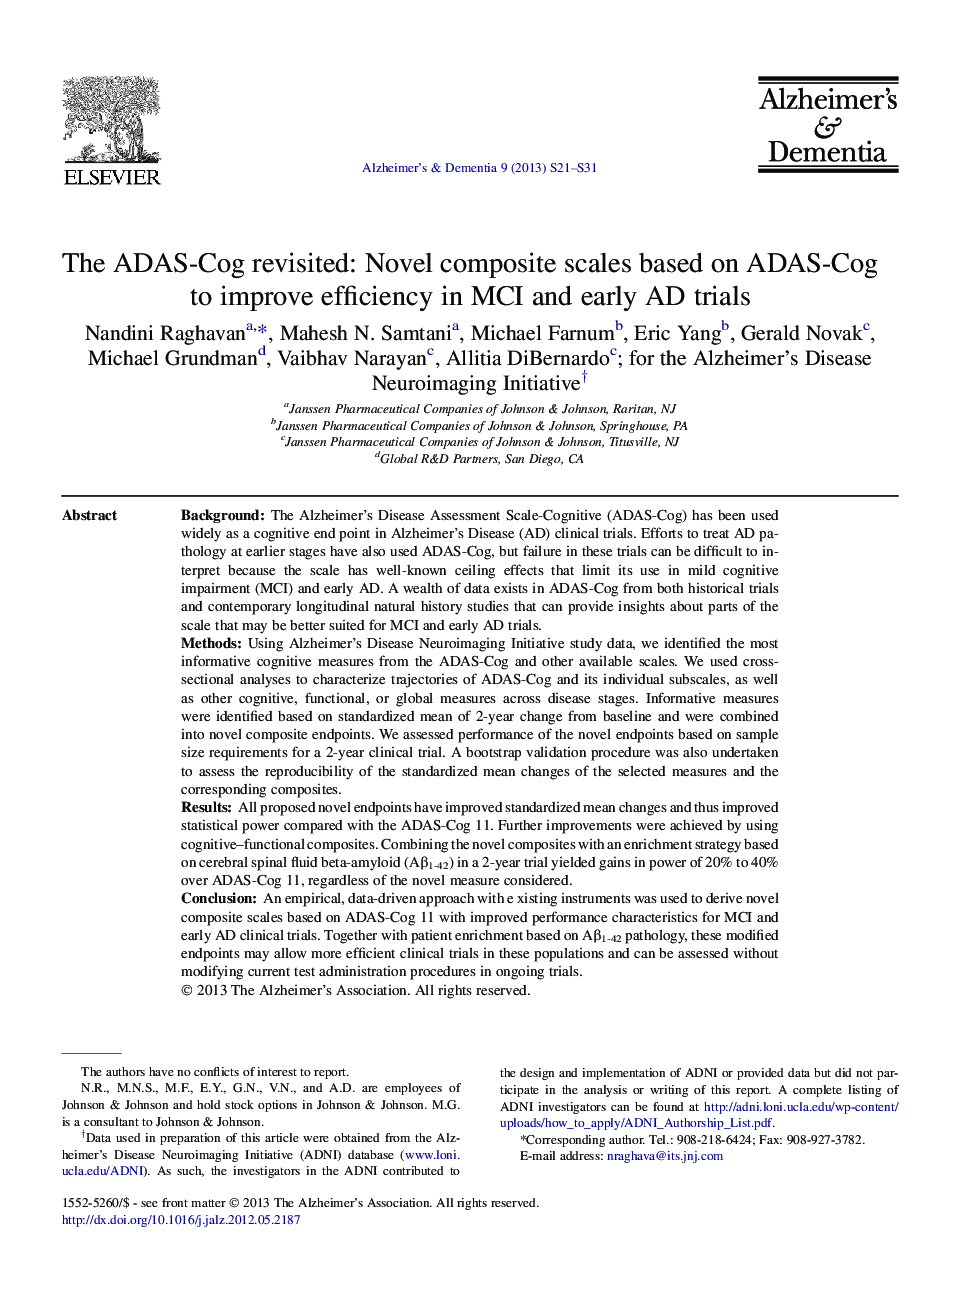 Featured ArticleThe ADAS-Cog revisited: Novel composite scales based on ADAS-Cog to improve efficiency in MCI and early AD trials